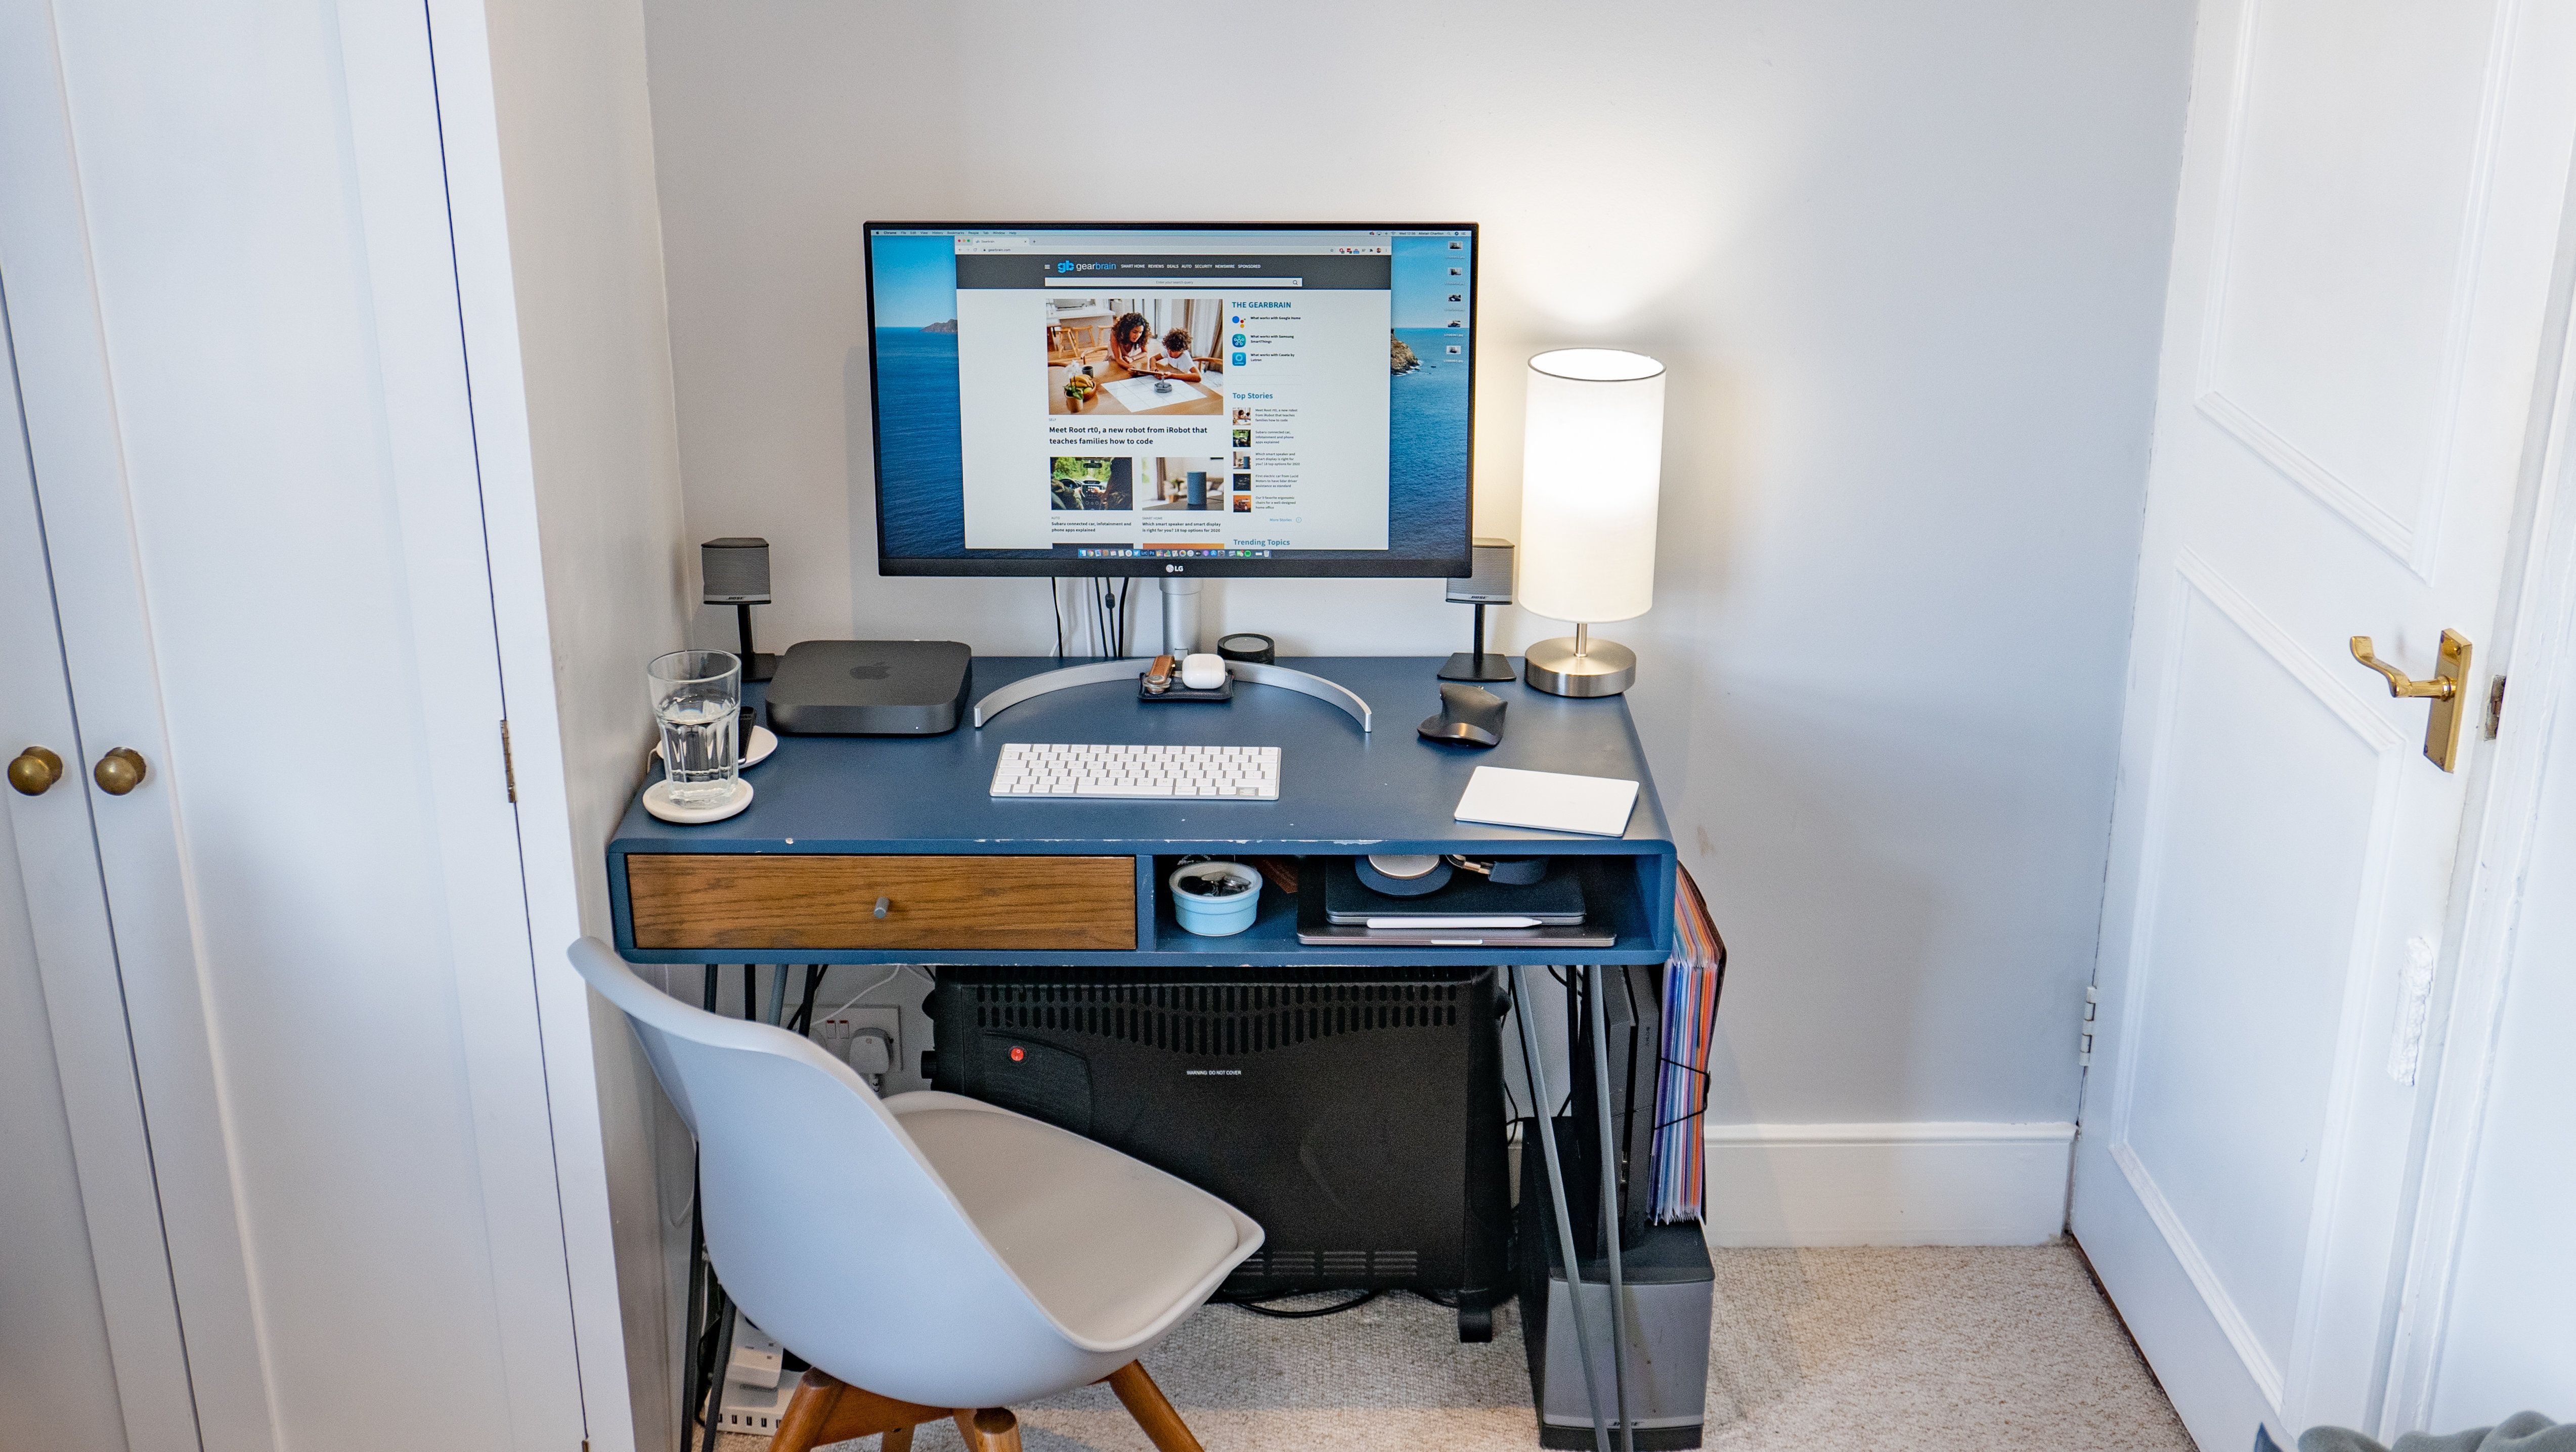 How to build a smart home office in the smallest of spaces - Gearbrain